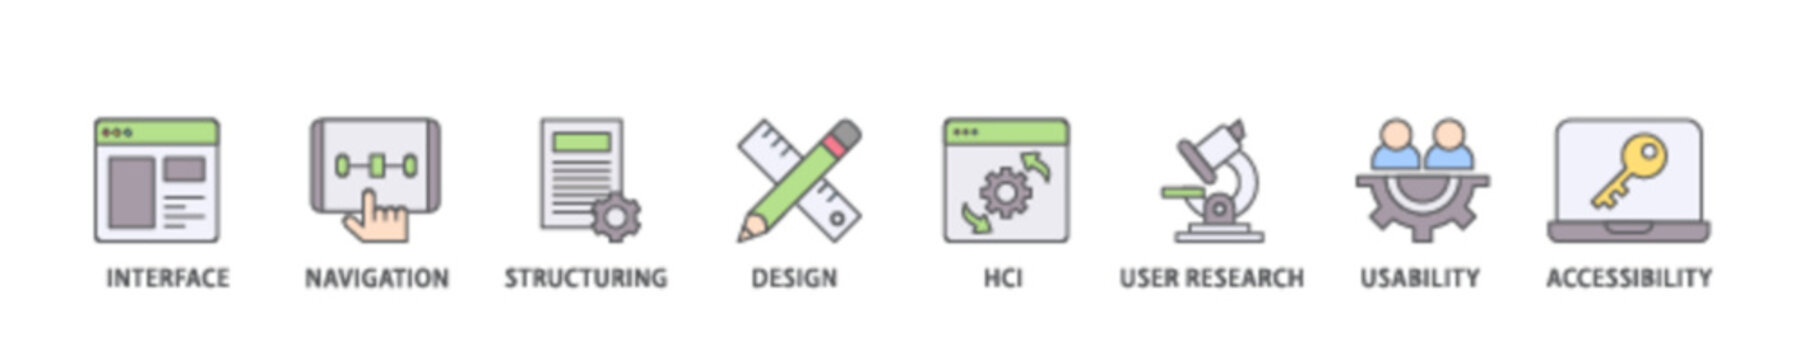 UX design icon set flow process illustrationwhich consists of accessibility, usability, design, user research, hci, structuring, navigation, interface icon live stroke and easy to edit 